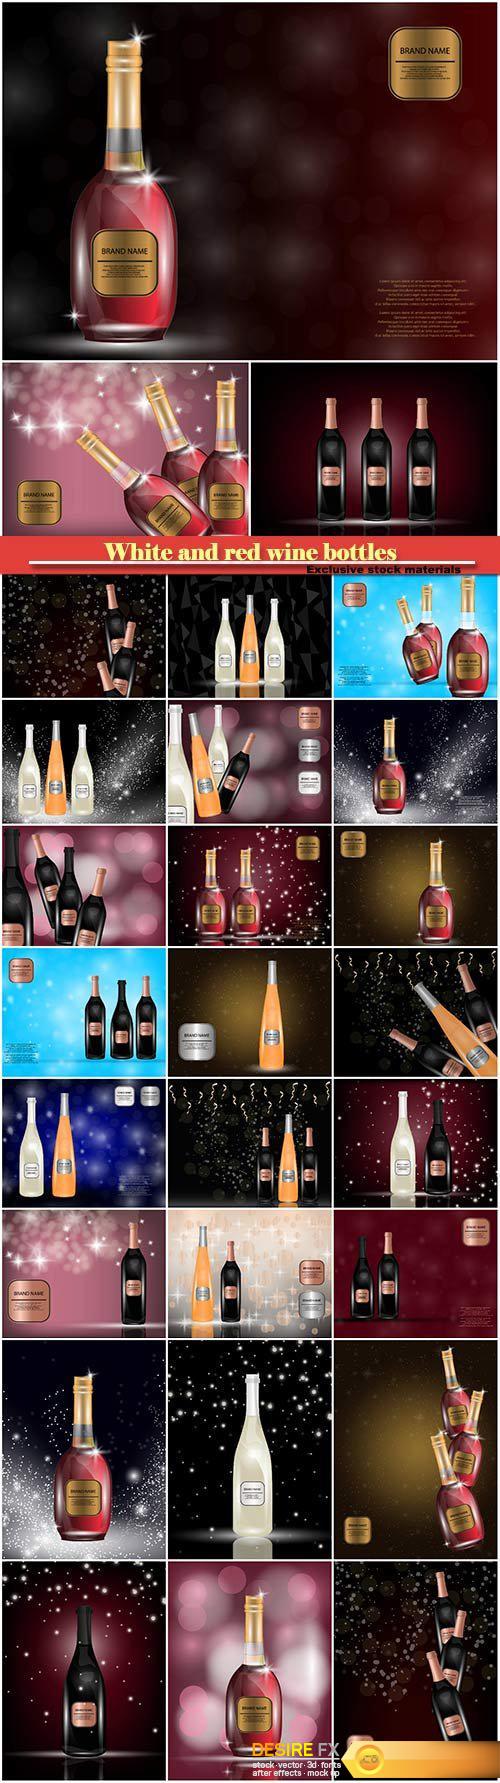 White and red wine bottles on the sparkling vector background